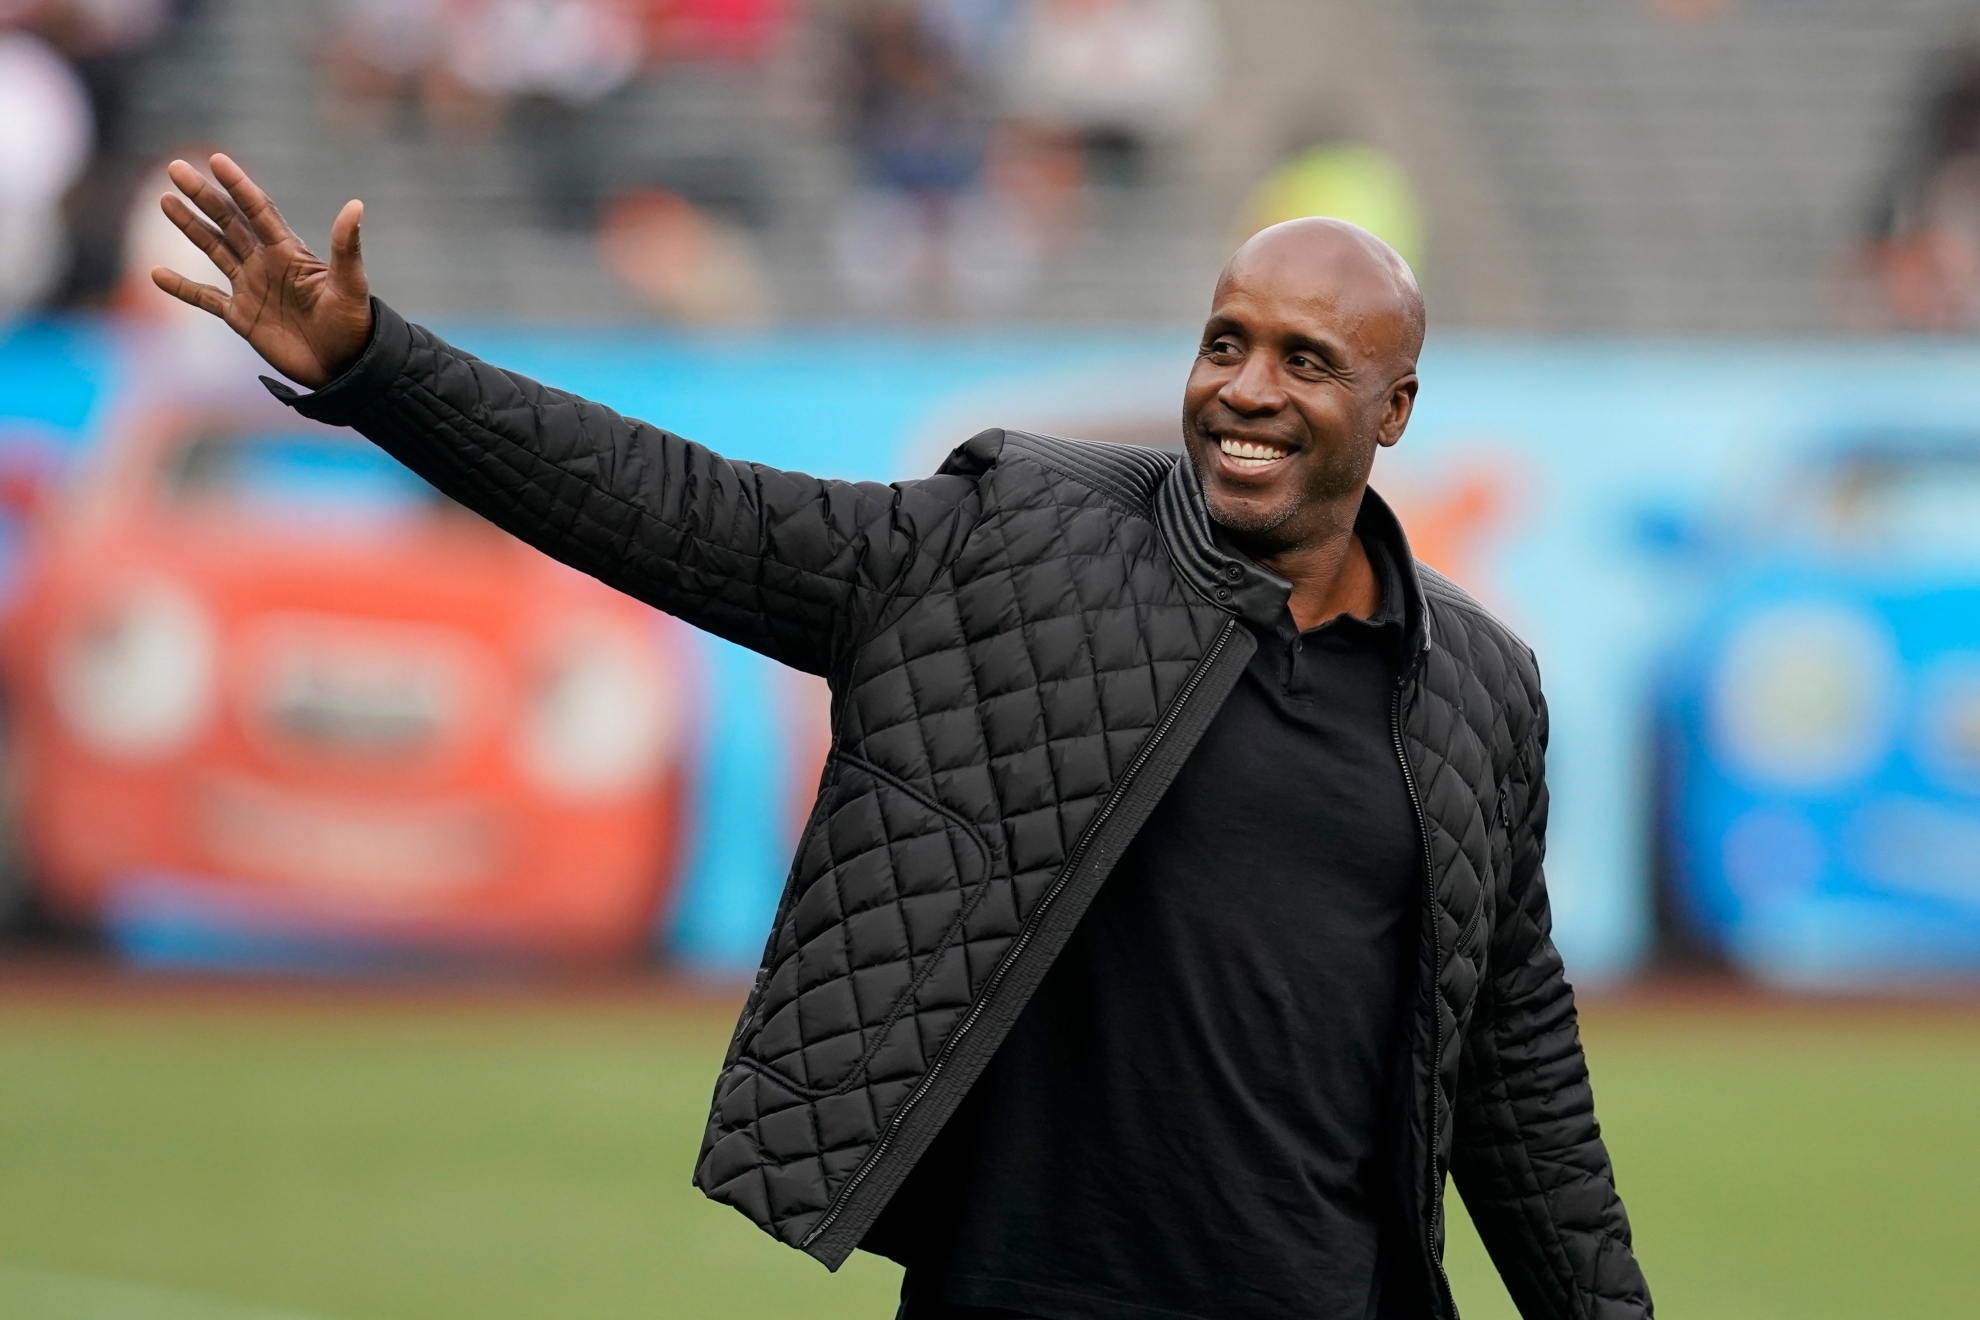 Former San Francisco Giants player Barry Bonds waves as he arrives at a ceremony honoring Hunter Pence on the team's Wall of Fame before a baseball game between the Giants and the Los Angeles Dodgers in San Francisco, Saturday, Sept. 17, 2022. AP